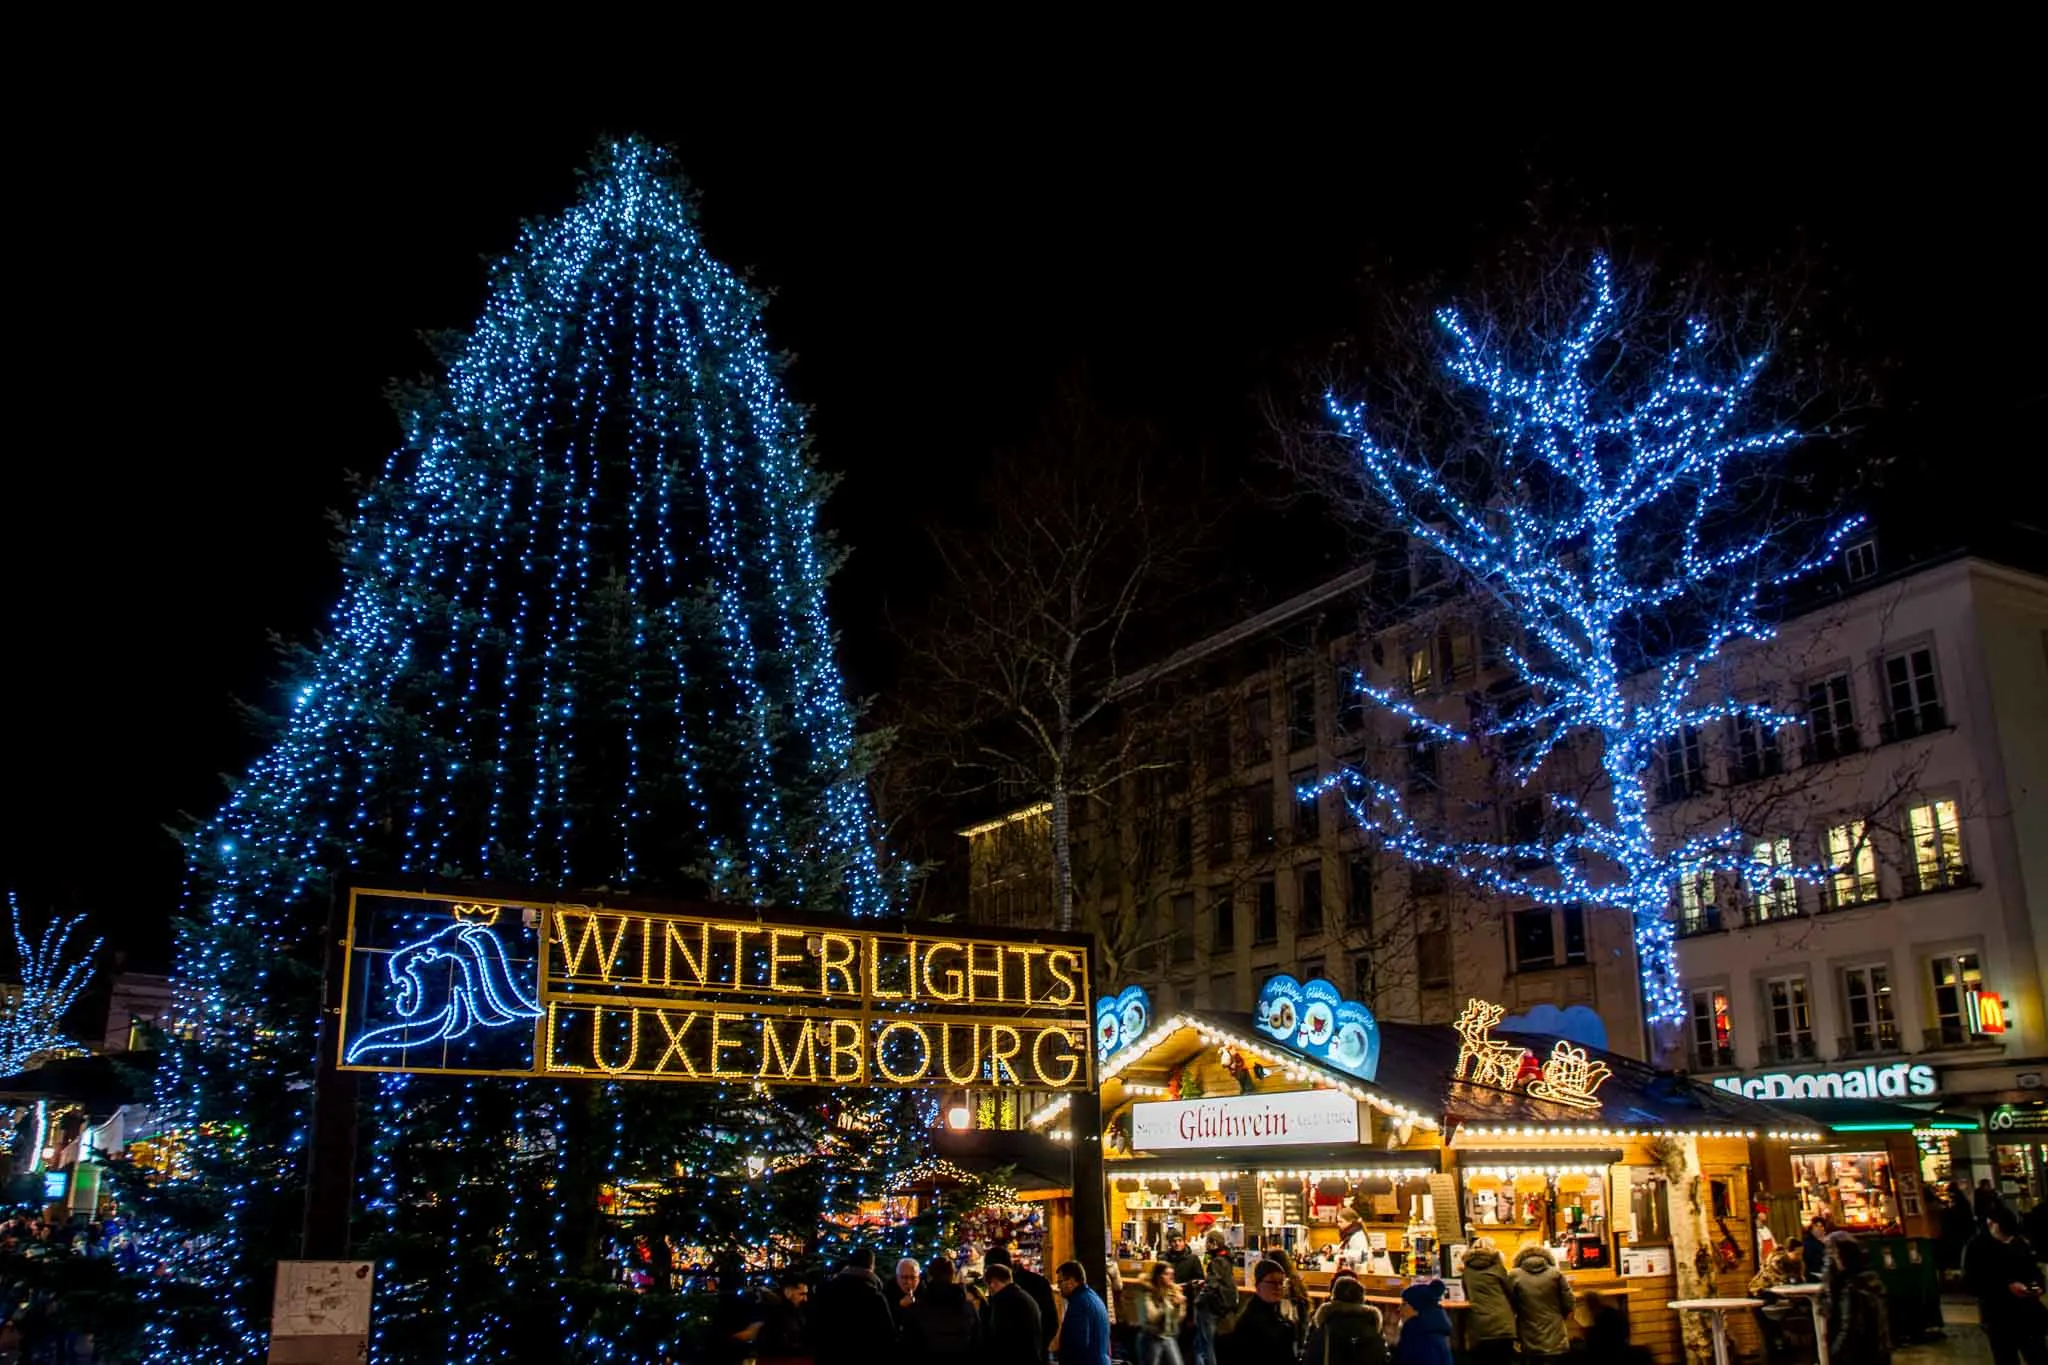 The Luxembourg Christmas markets are decked out with lights for the holiday season